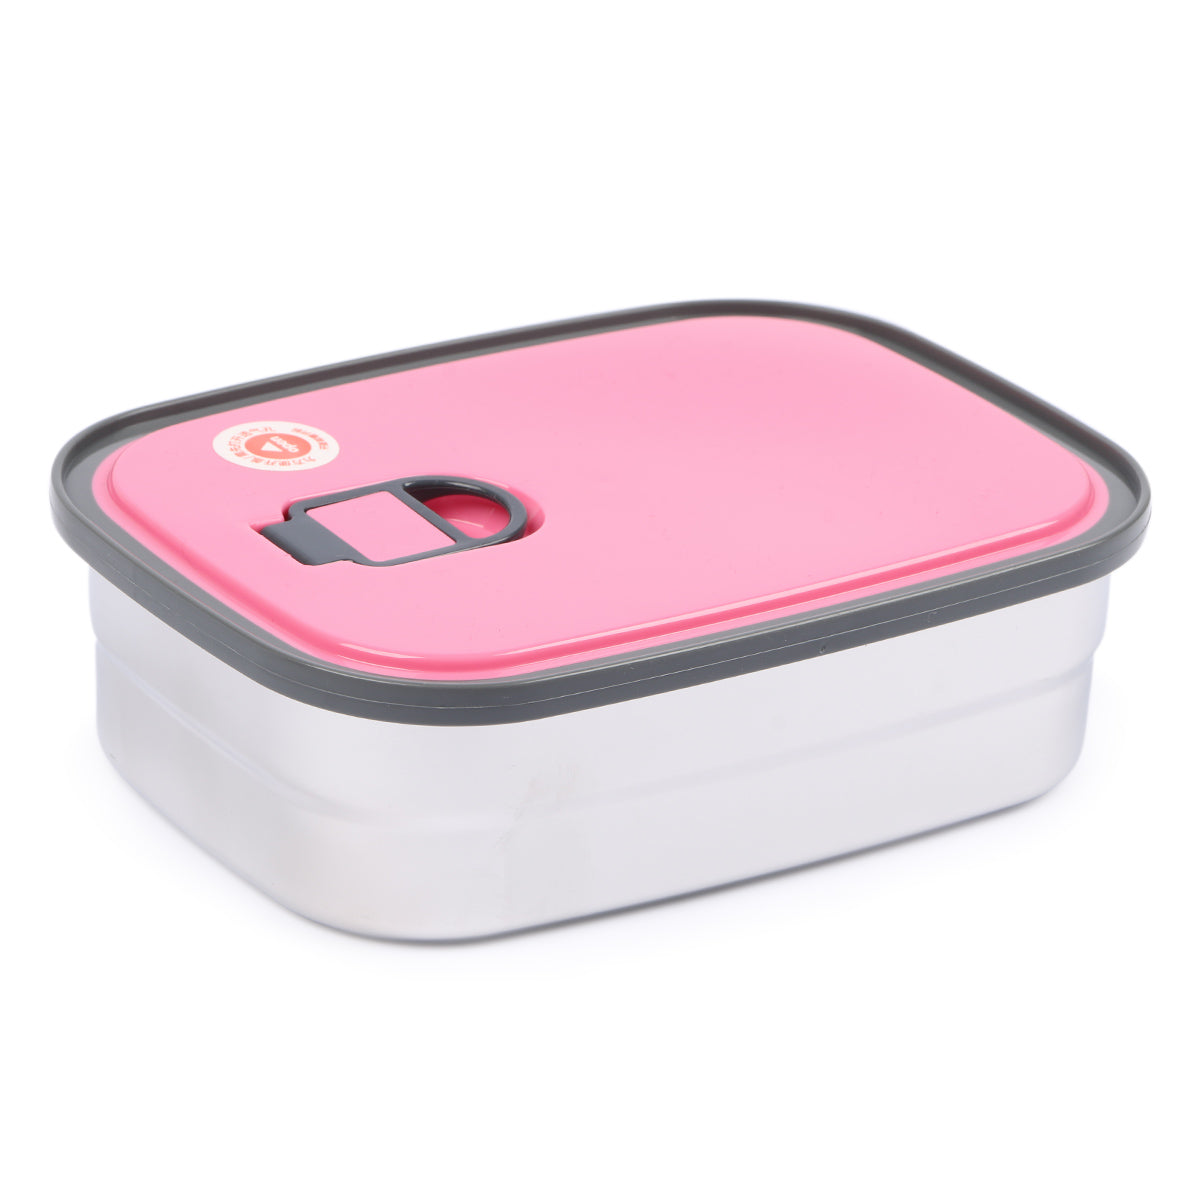 LUNCH BOX LARGE - 29708